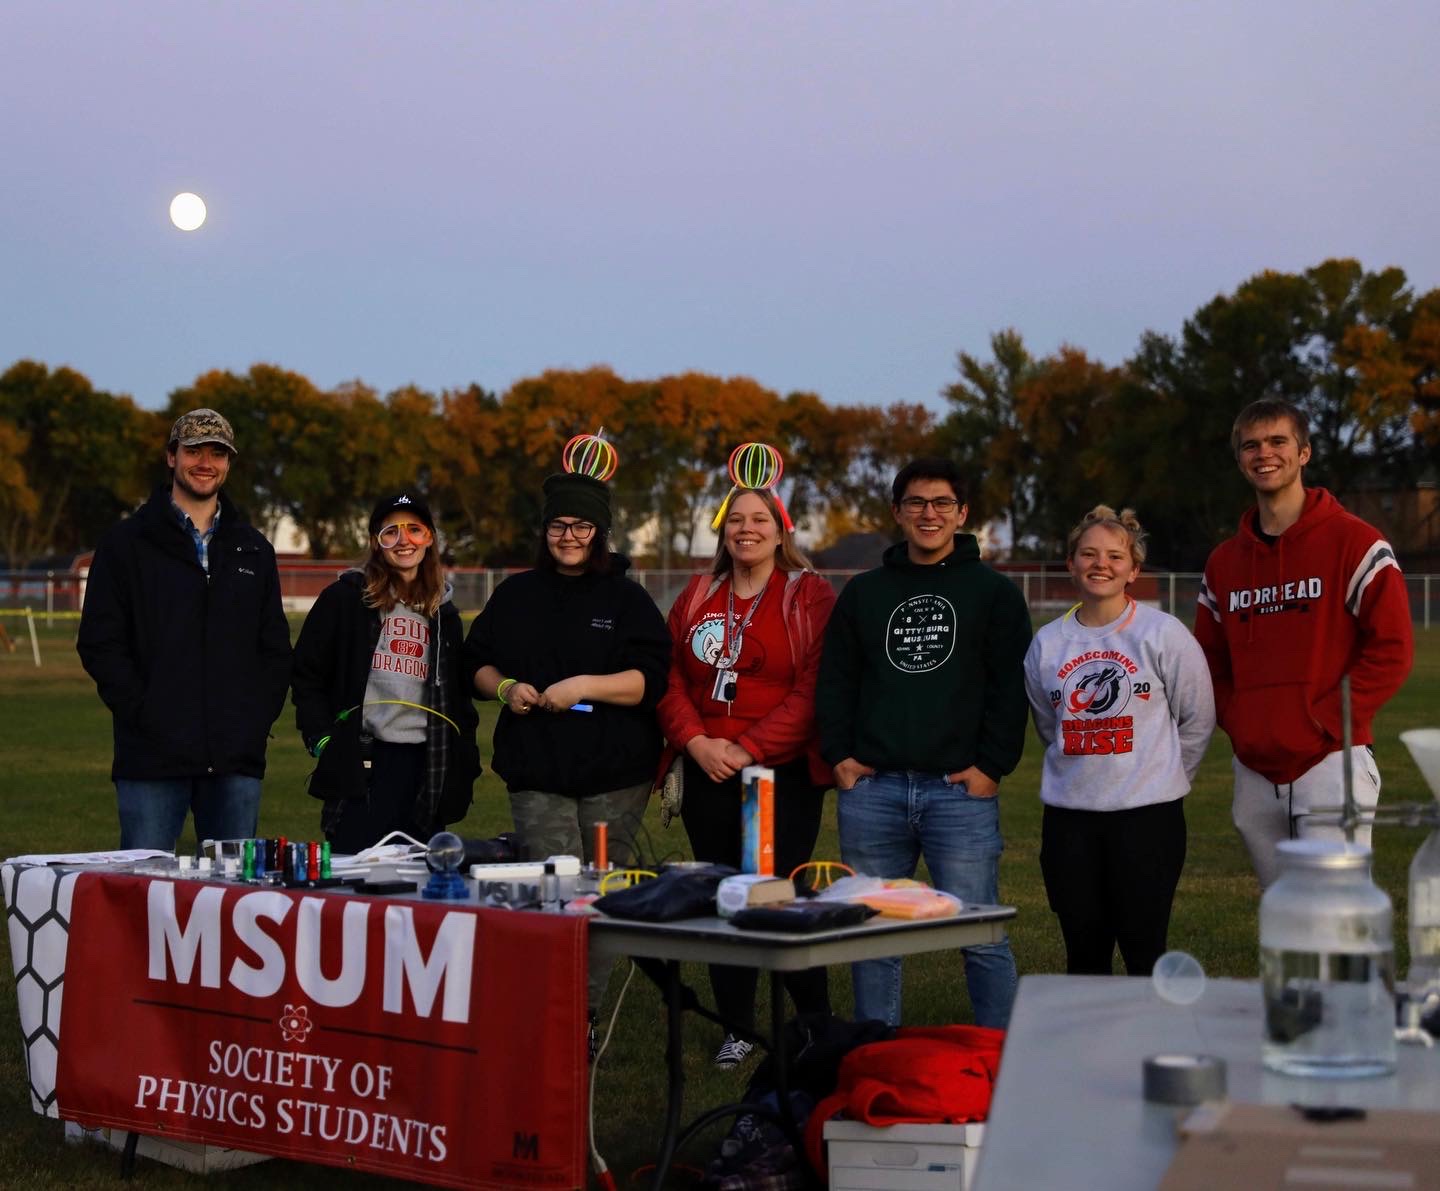 MSUM’s Society of Physics Students earns Outstanding Chapter Recognition by Professional Association